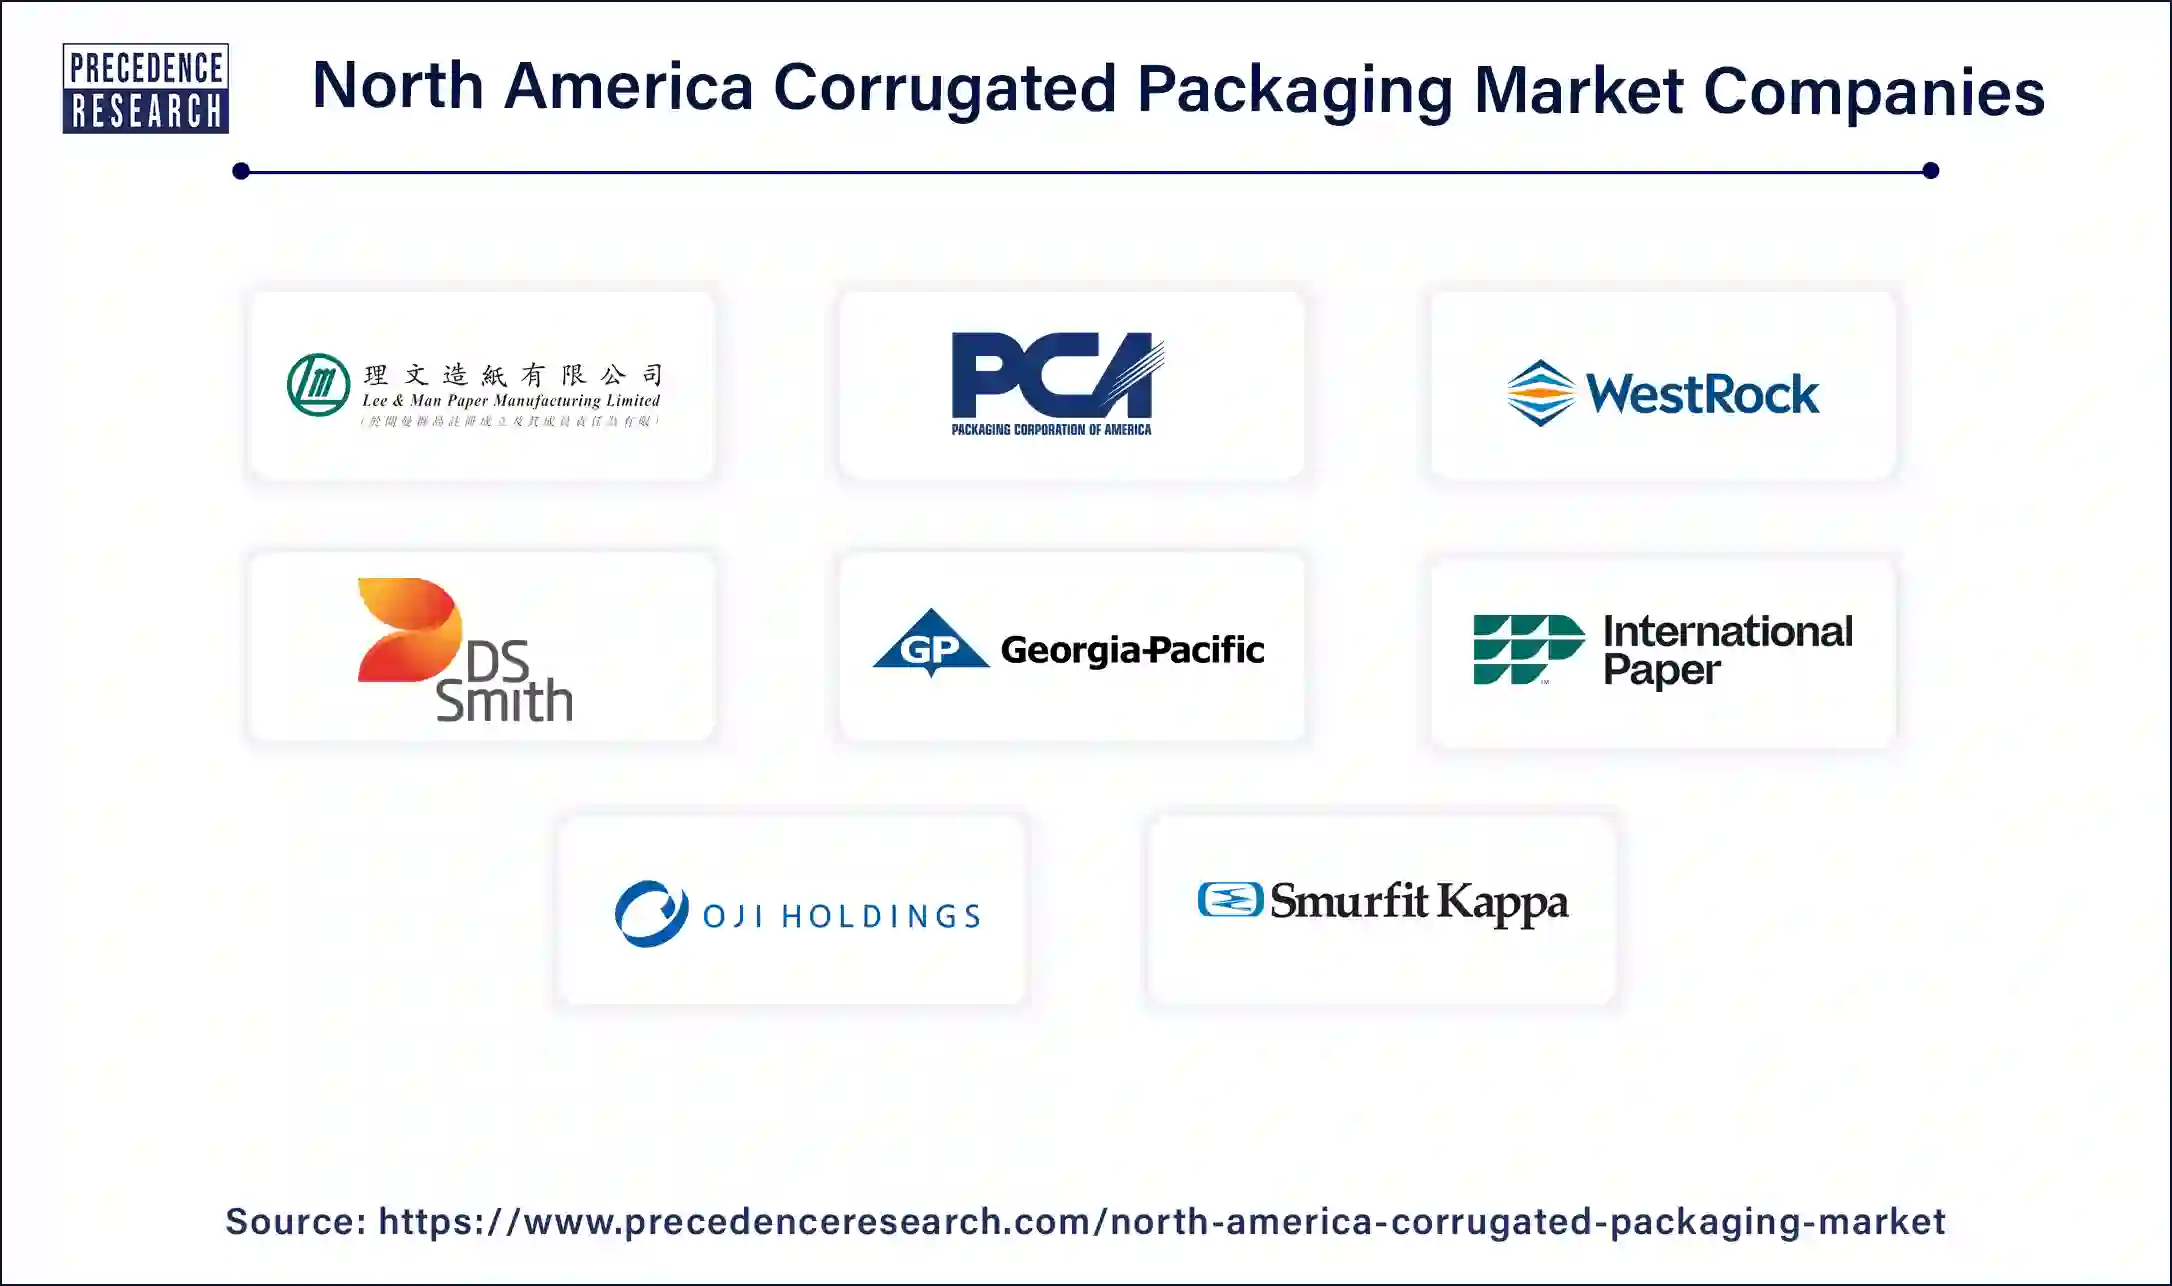 North America Corrugated Packaging Companies